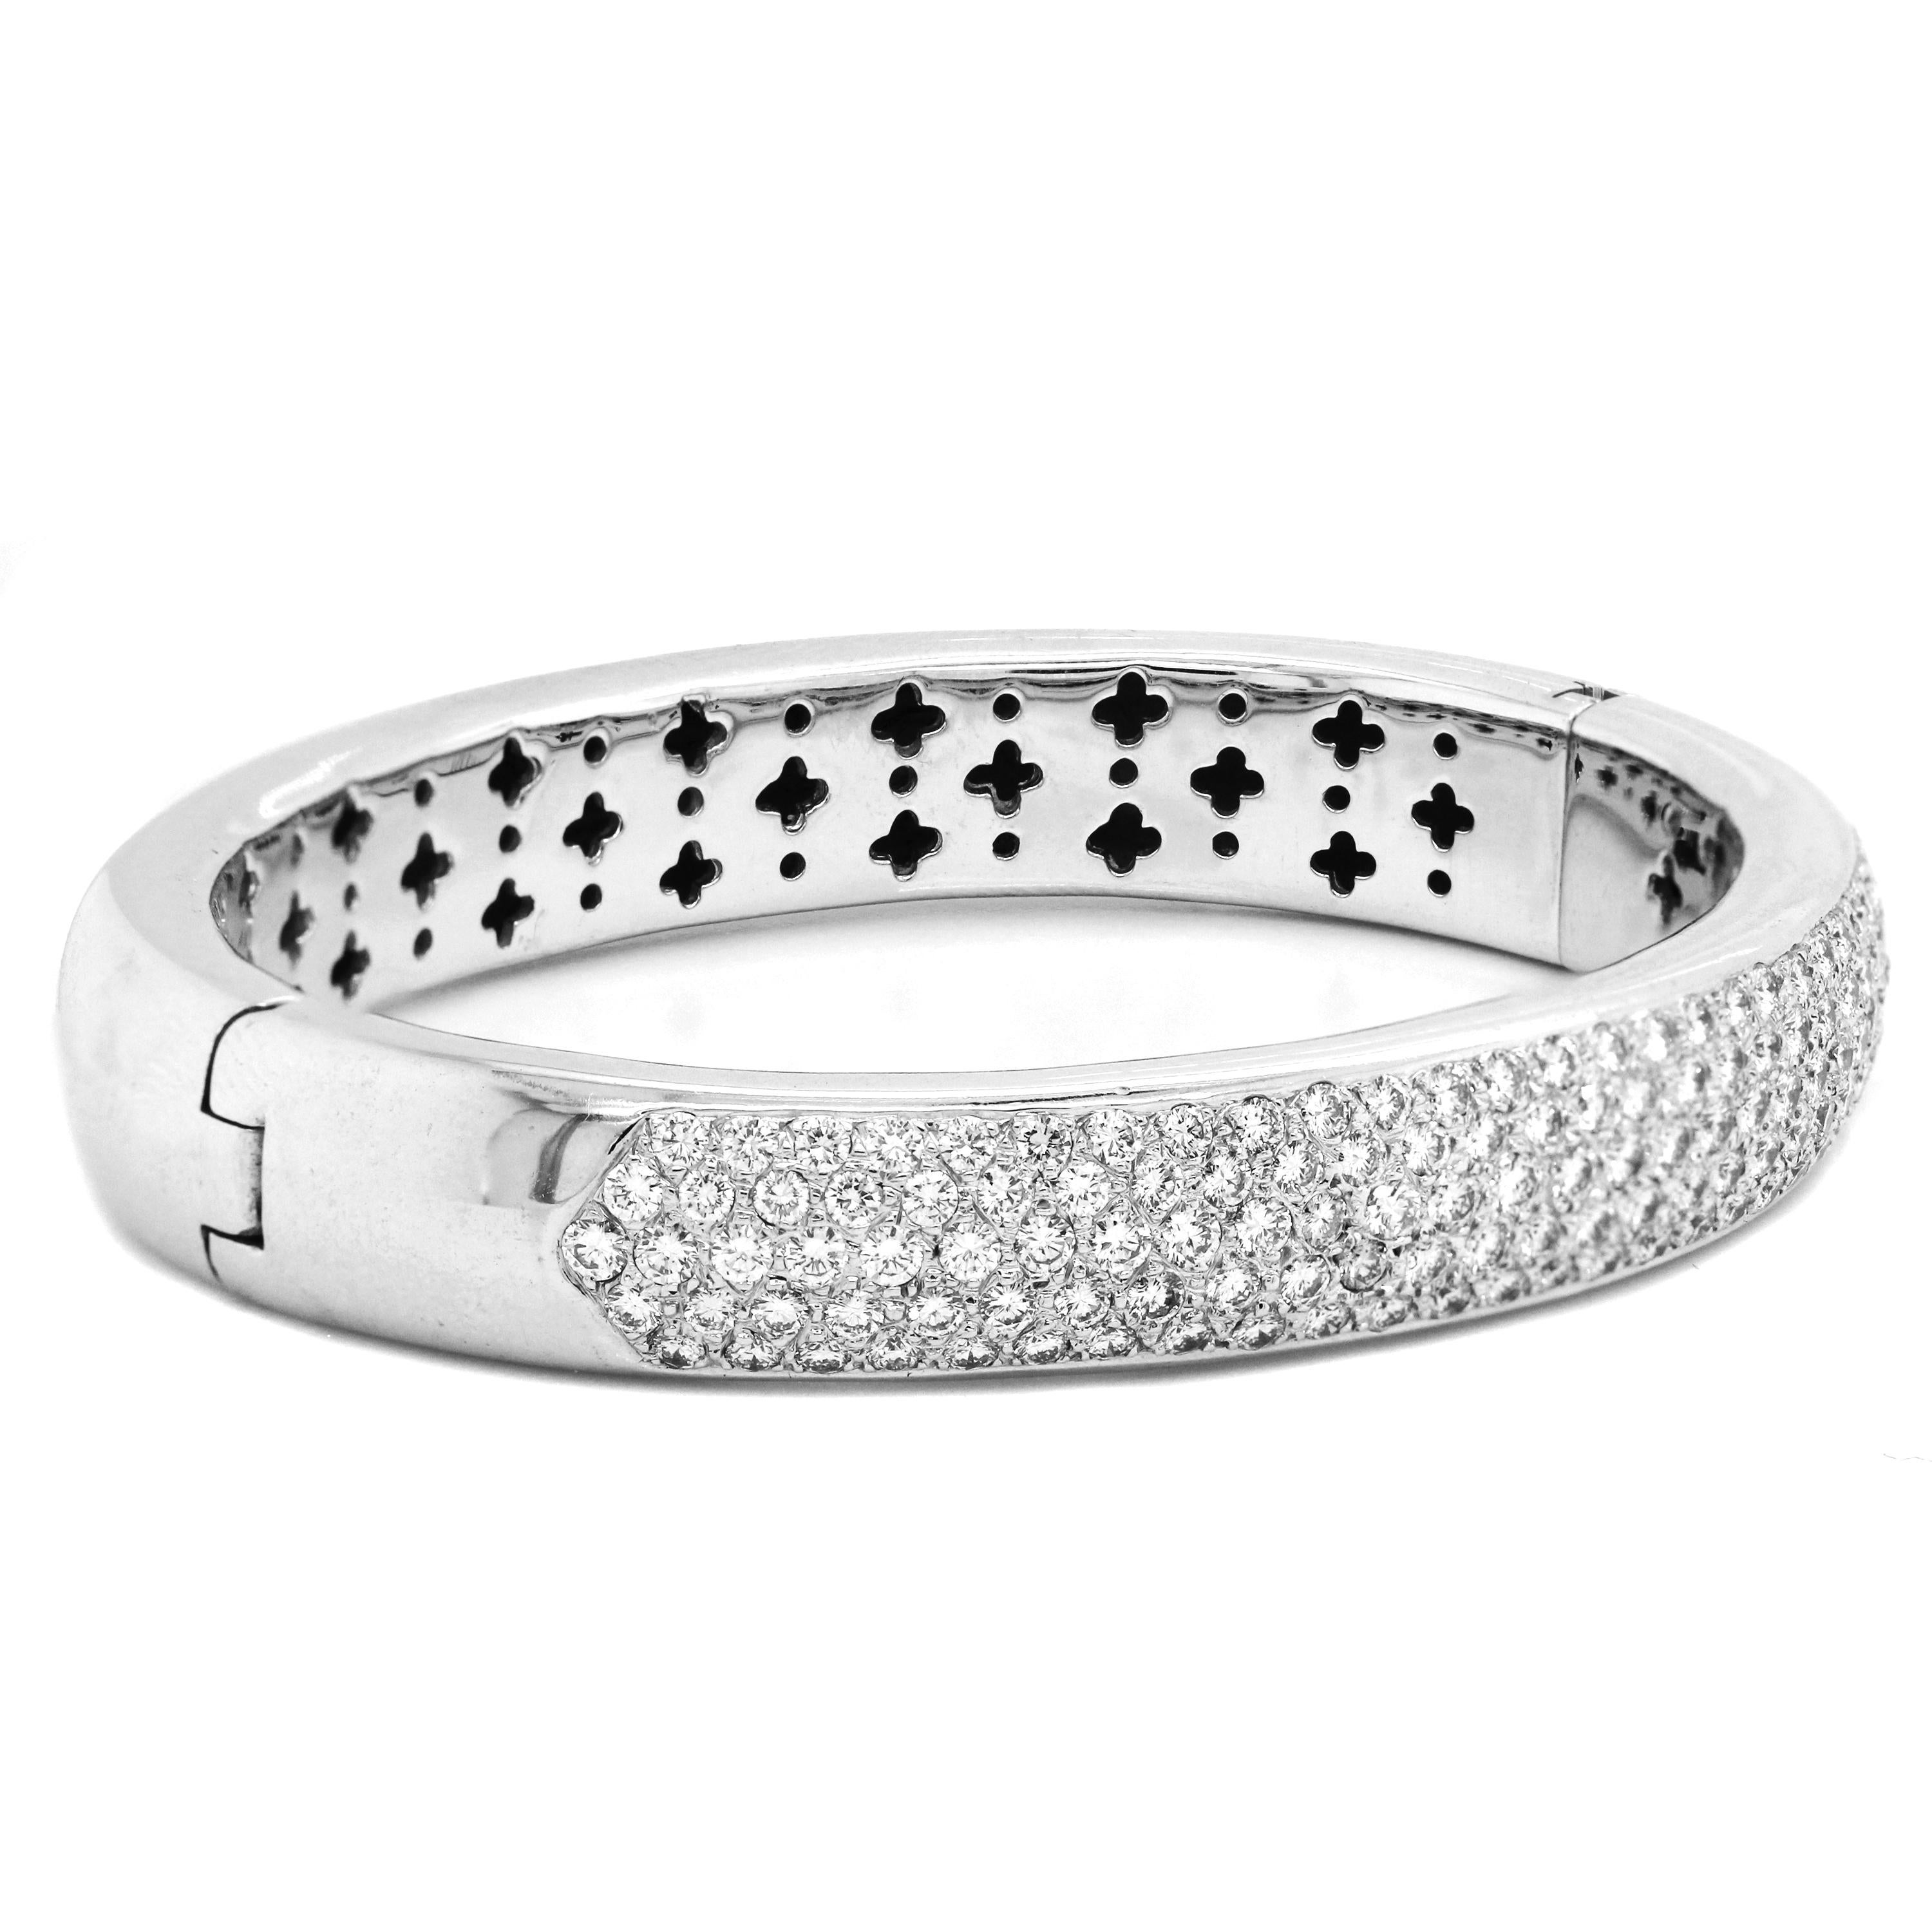 IF YOU ARE REALLY INTERESTED, CONTACT US WITH ANY REASONABLE OFFER. WE WILL TRY OUR BEST TO MAKE YOU HAPPY!

18K White Gold and Diamond Bangle Bracelet 

5.05 carat G color, VS clarity Diamonds

Bracelet comes standard Size 7

Made in USA